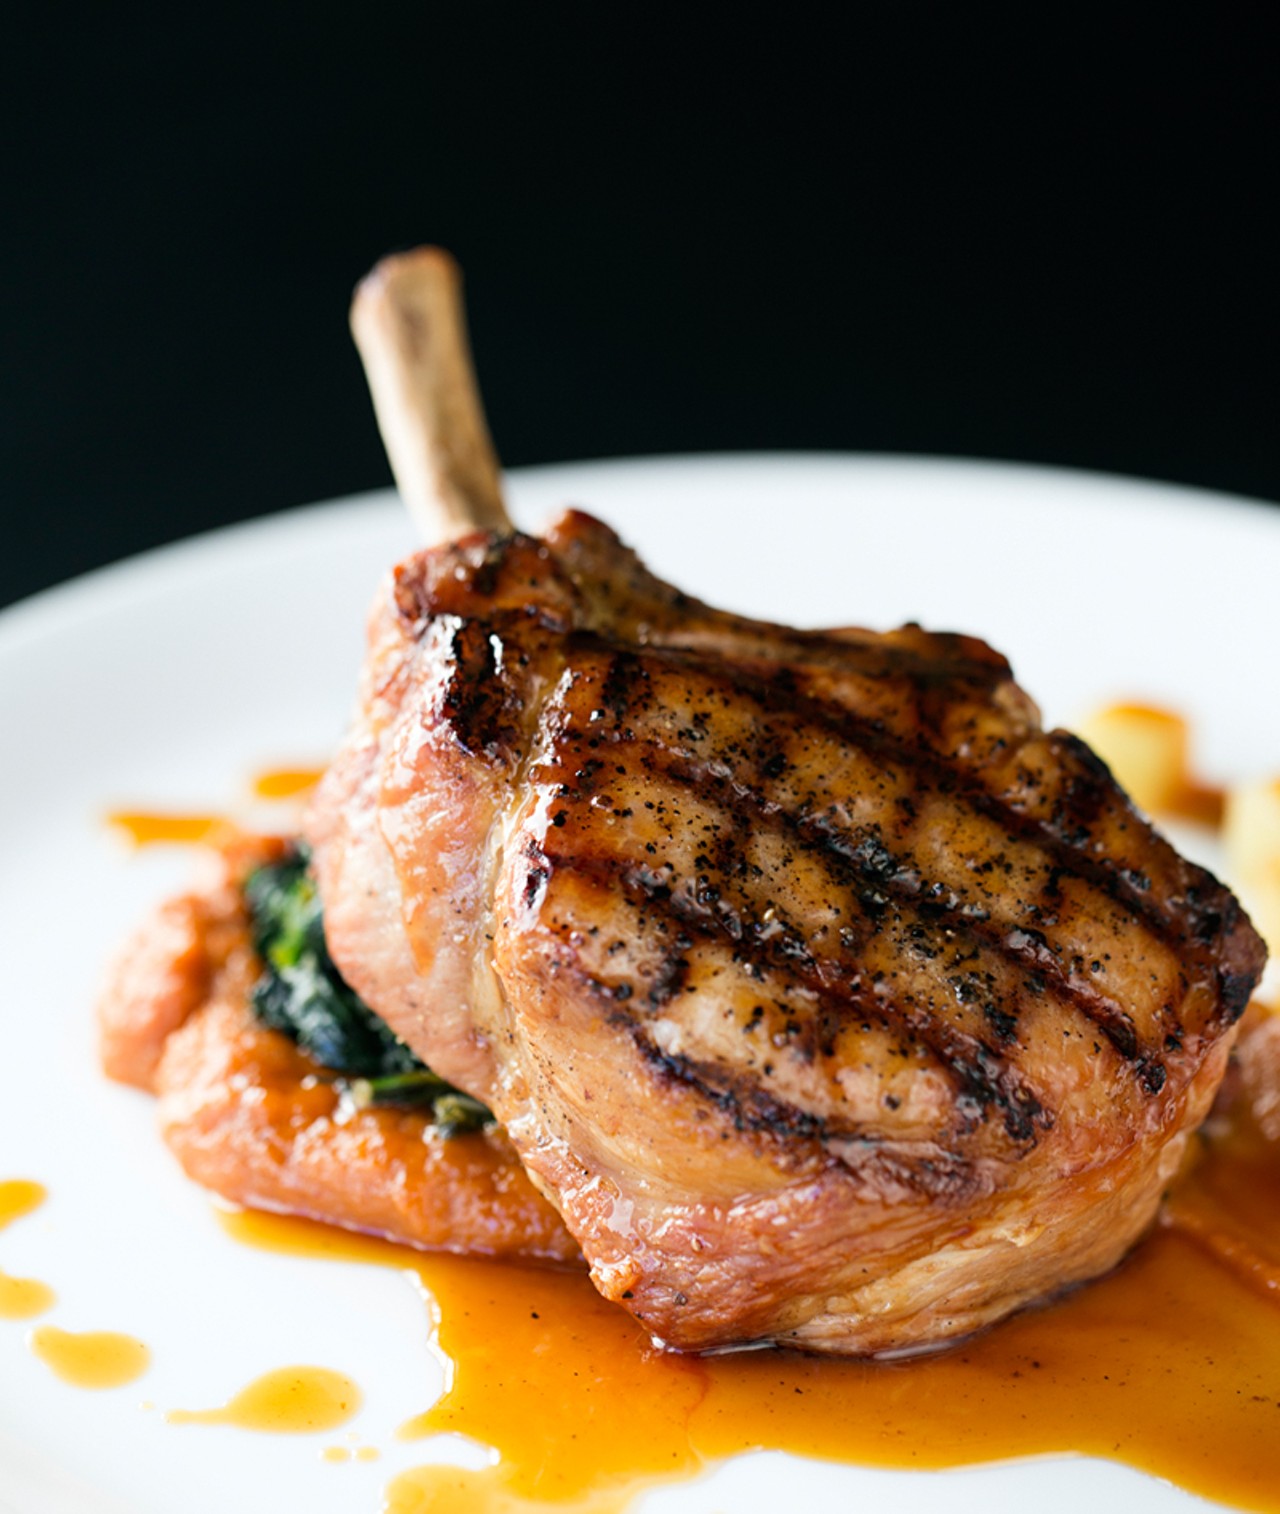 The smoked pork chop is cold smoked with apple and cherry wood, served with cider sauce, compressed apples, spinach and sweet-potato puree.